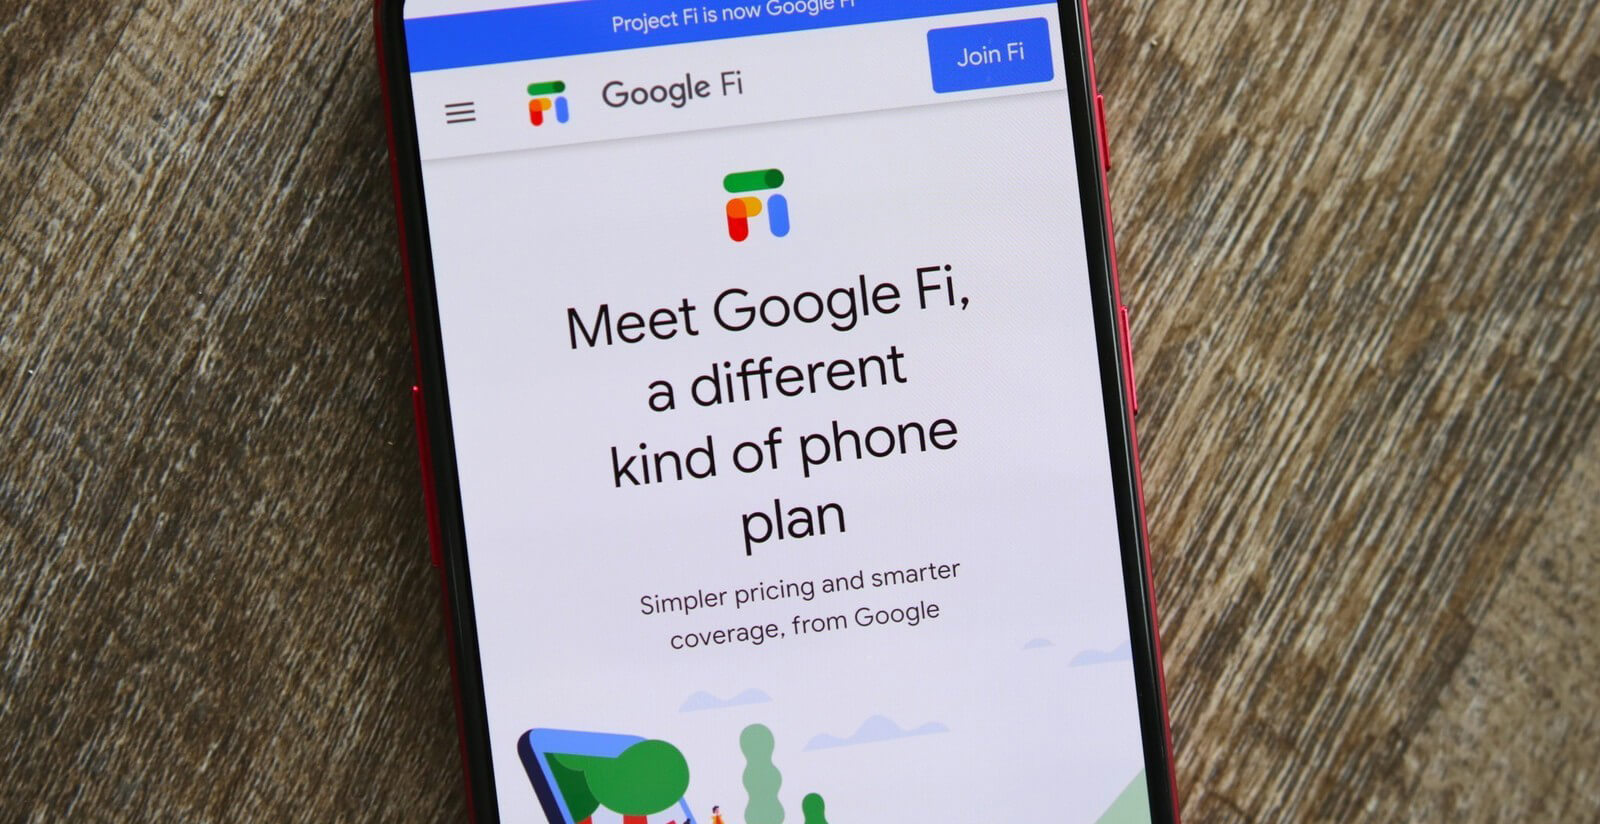 Google Fi SIM cards can now be purchased at Best Buy